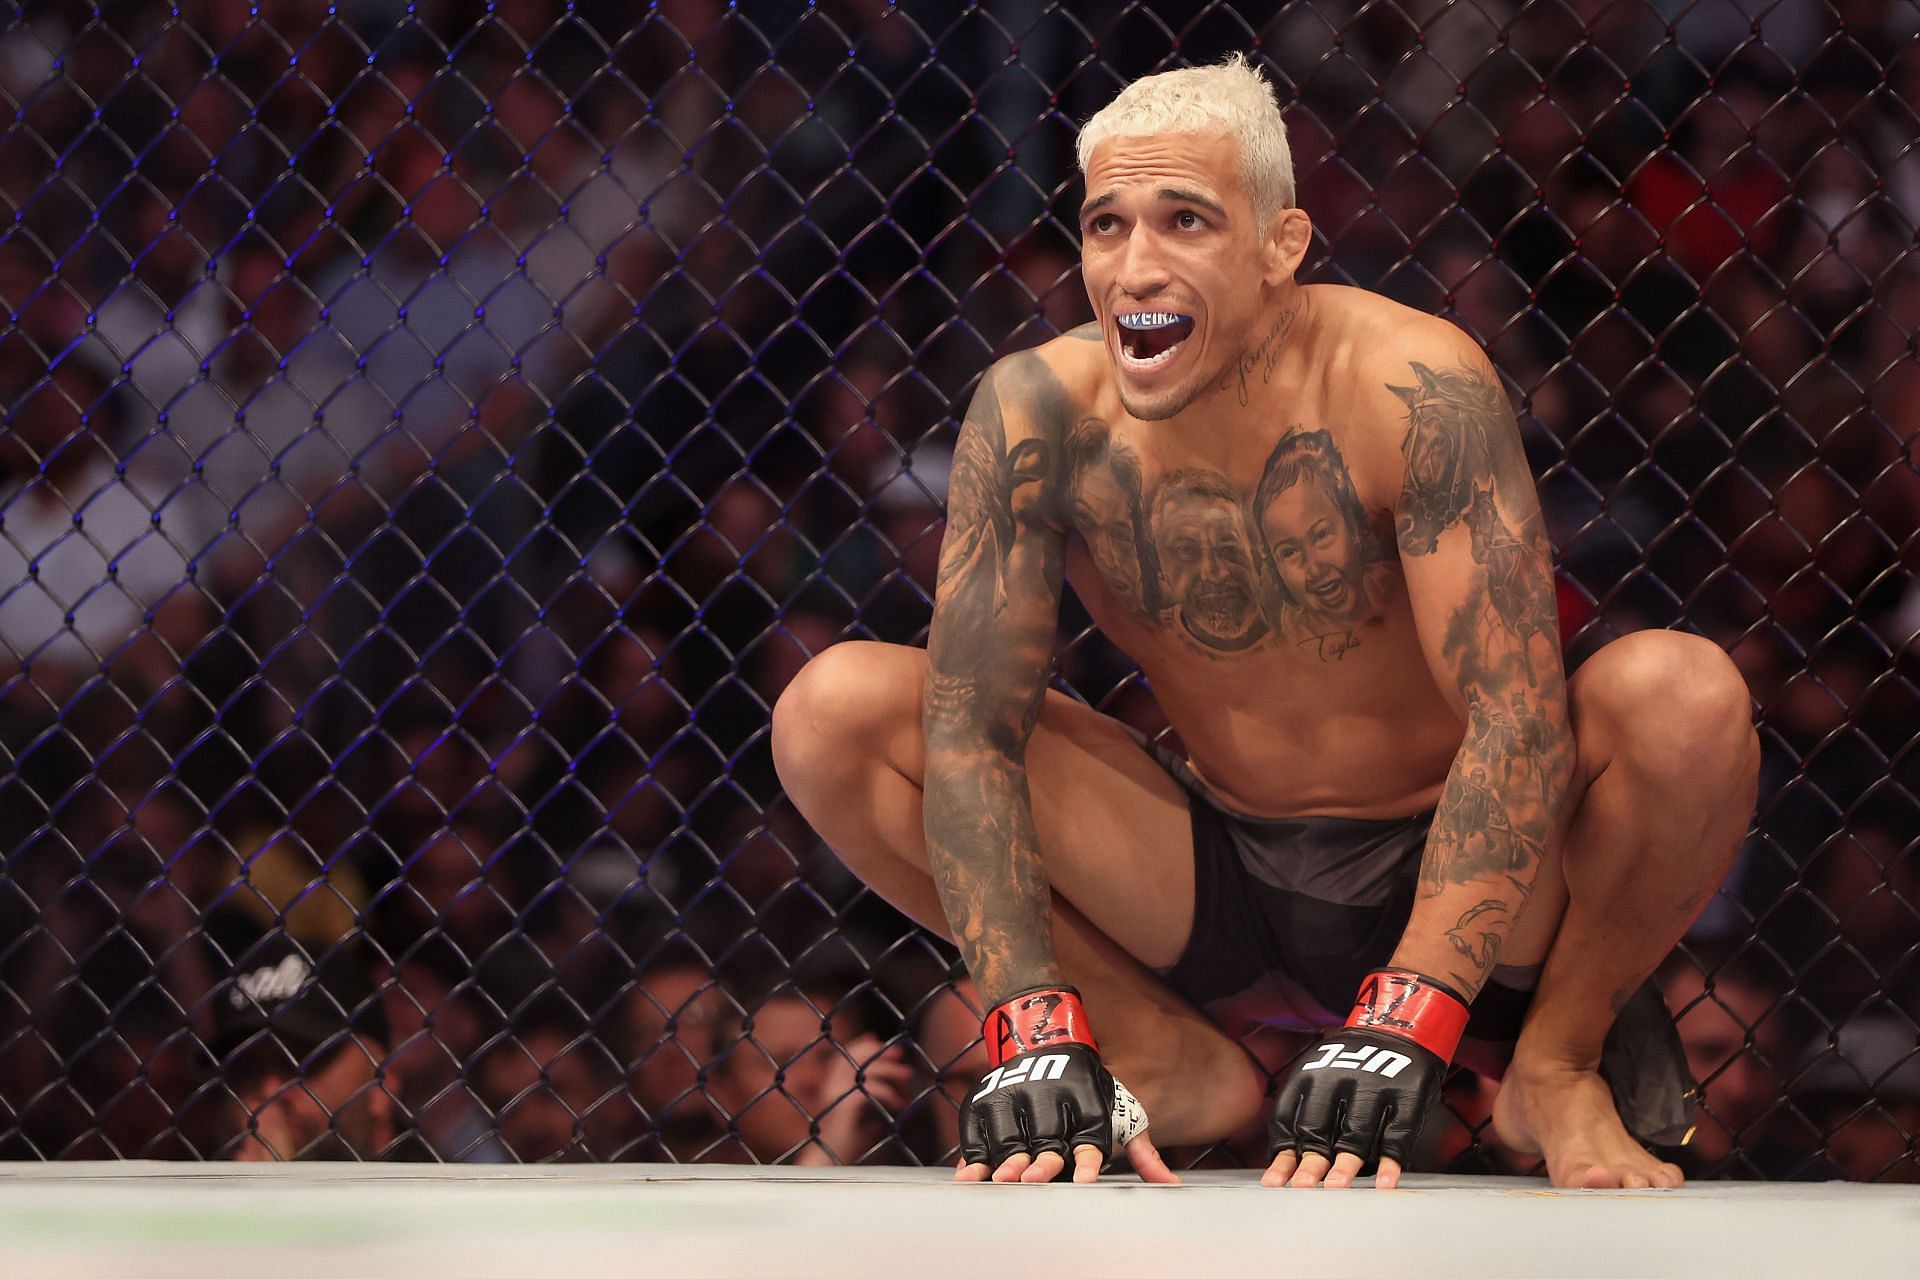 Conor McGregor would make an excellent stylistic opponent for Charles Oliveira